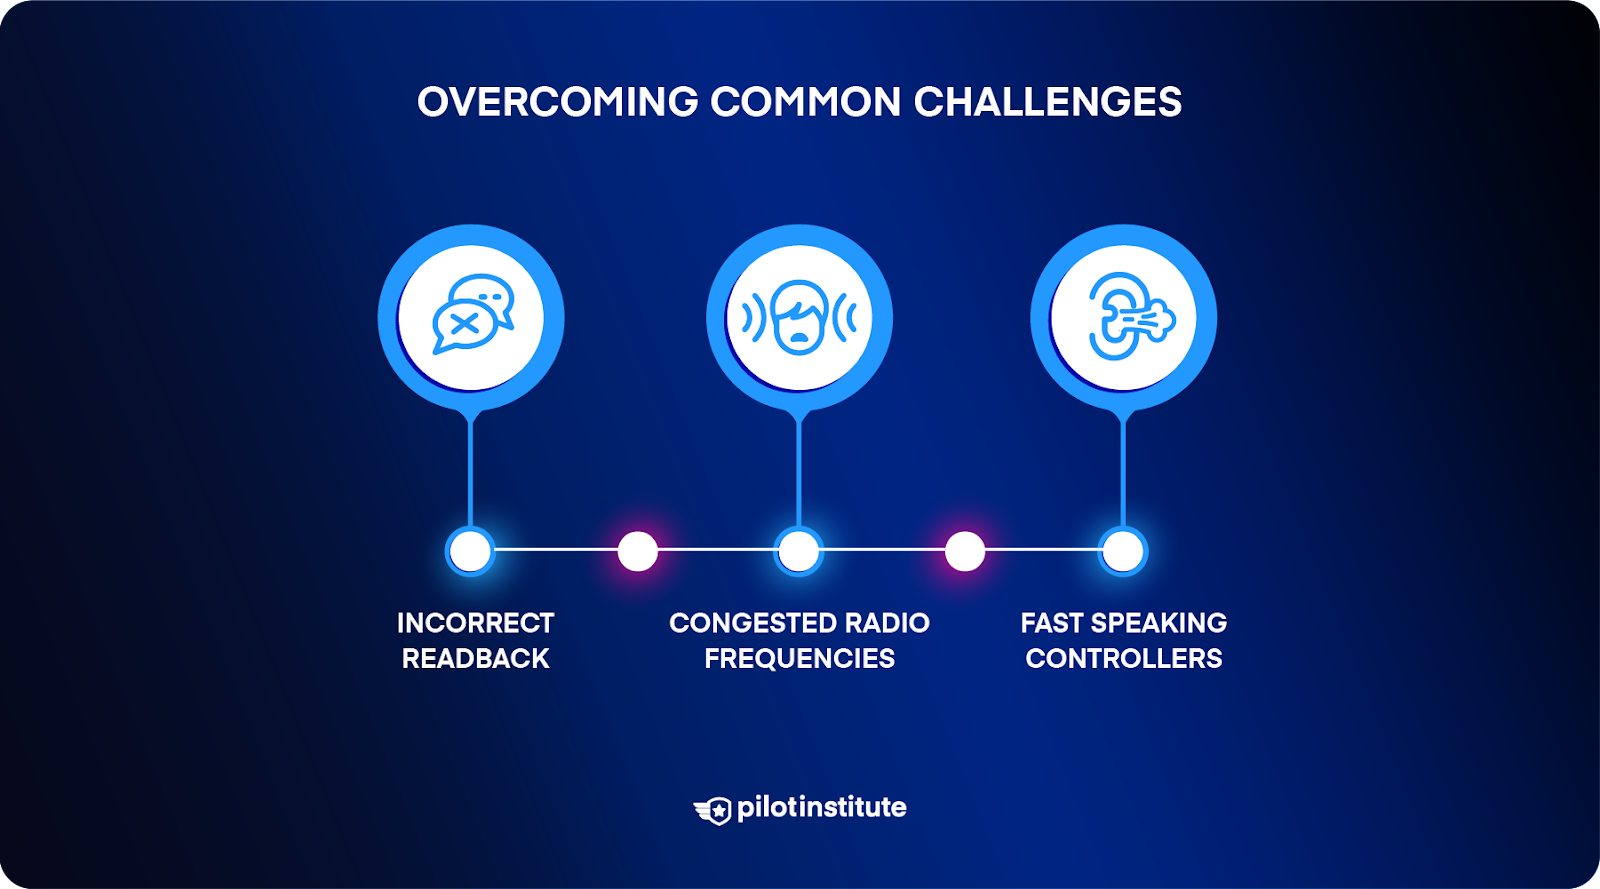 Overcoming Common Challenges infographic.